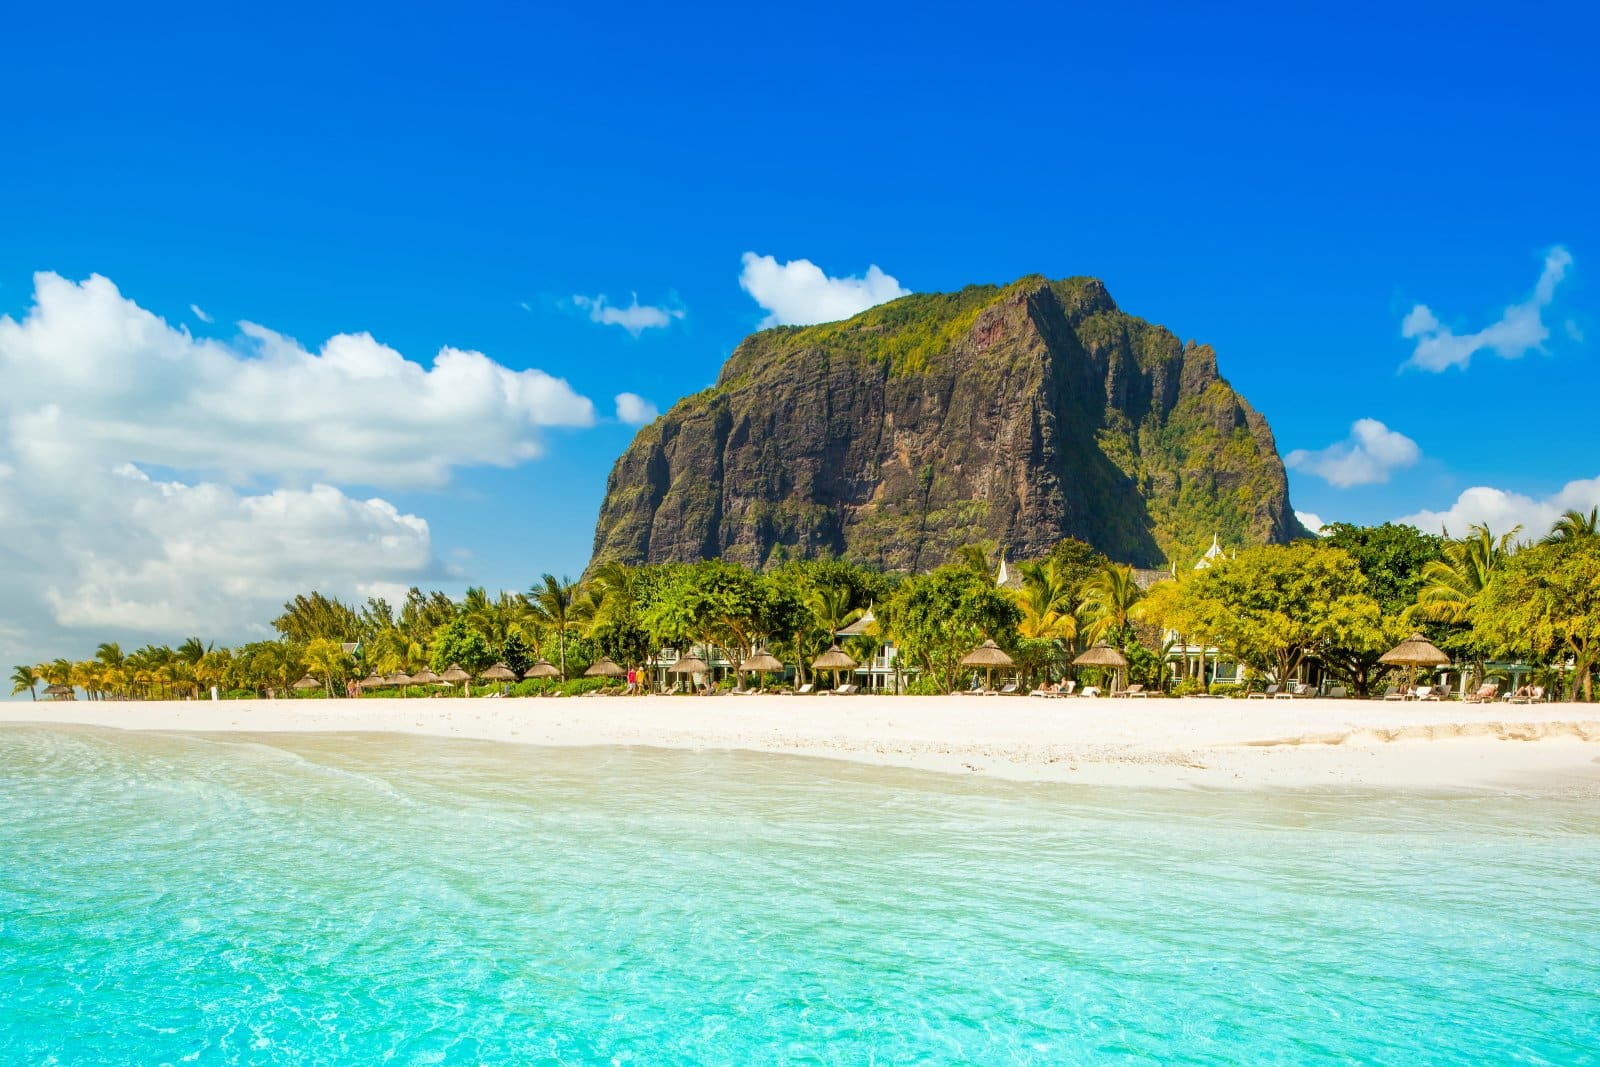 <p class="wp-caption-text">Image Credit: Shutterstock / Myroslava Bozhko</p>  <p><span>Mauritius, an island nation in the Indian Ocean, is synonymous with crystal-clear waters, white sandy beaches, and lush mountainous landscapes. Beyond its postcard-perfect coastlines, Mauritius boasts rich cultures, biodiversity hotspots, and extensive conservation areas. The island’s commitment to environmental preservation is evident in its marine parks, botanical gardens, and efforts to protect endemic species. Visitors can experience a blend of cultures, indulge in Creole cuisine, and explore the natural wonders that make Mauritius a standout destination for eco-tourism. Activities such as snorkeling in the coral reefs, hiking in the Black River Gorges National Park, and visiting the iconic Le Morne Brabant showcase the island’s natural beauty and dedication to sustainable tourism practices.</span></p> <p><b>Insider’s Tip:</b><span> Take a guided Black River Gorges National Park tour to witness Mauritius’s indigenous forests and wildlife, including rare bird species.</span></p> <p><b>When to Travel:</b><span> The best times to visit Mauritius are from May to December when the weather is cooler and drier.</span></p> <p><b>How to Get There:</b><span> Sir Seewoosagur Ramgoolam International Airport serves as the main gateway to Mauritius, with direct flights from Europe, Africa, and Asia. On the island, rental cars, taxis, and buses are available for transportation.</span></p>